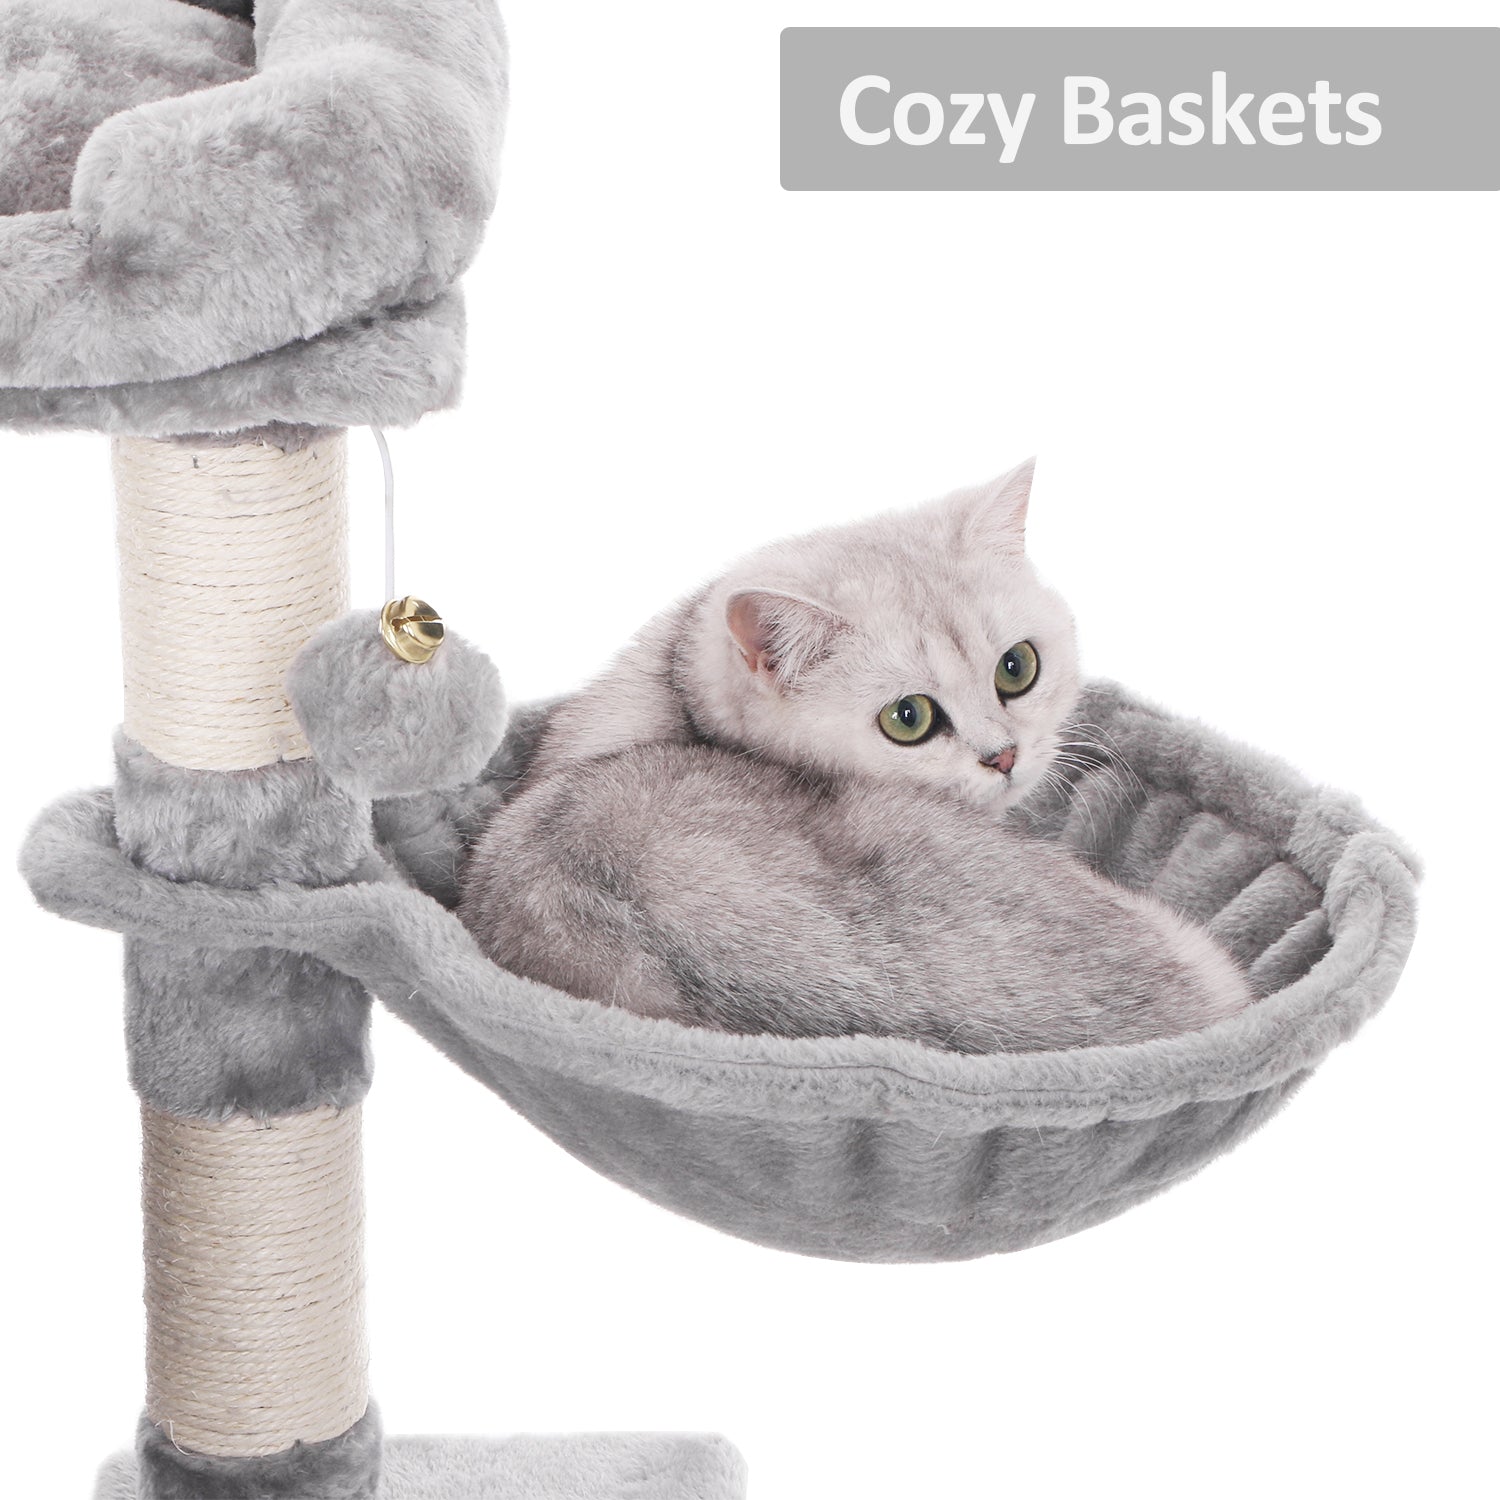 BEWISHOME Cat Tree Condo with Sisal Scratching Posts, Plush Perch, Dual Houses and Basket, Cat Tower Furniture Kitty Activity Center Kitten Play House MMJ06L Animals & Pet Supplies > Pet Supplies > Cat Supplies > Cat Furniture BEWISHOME   